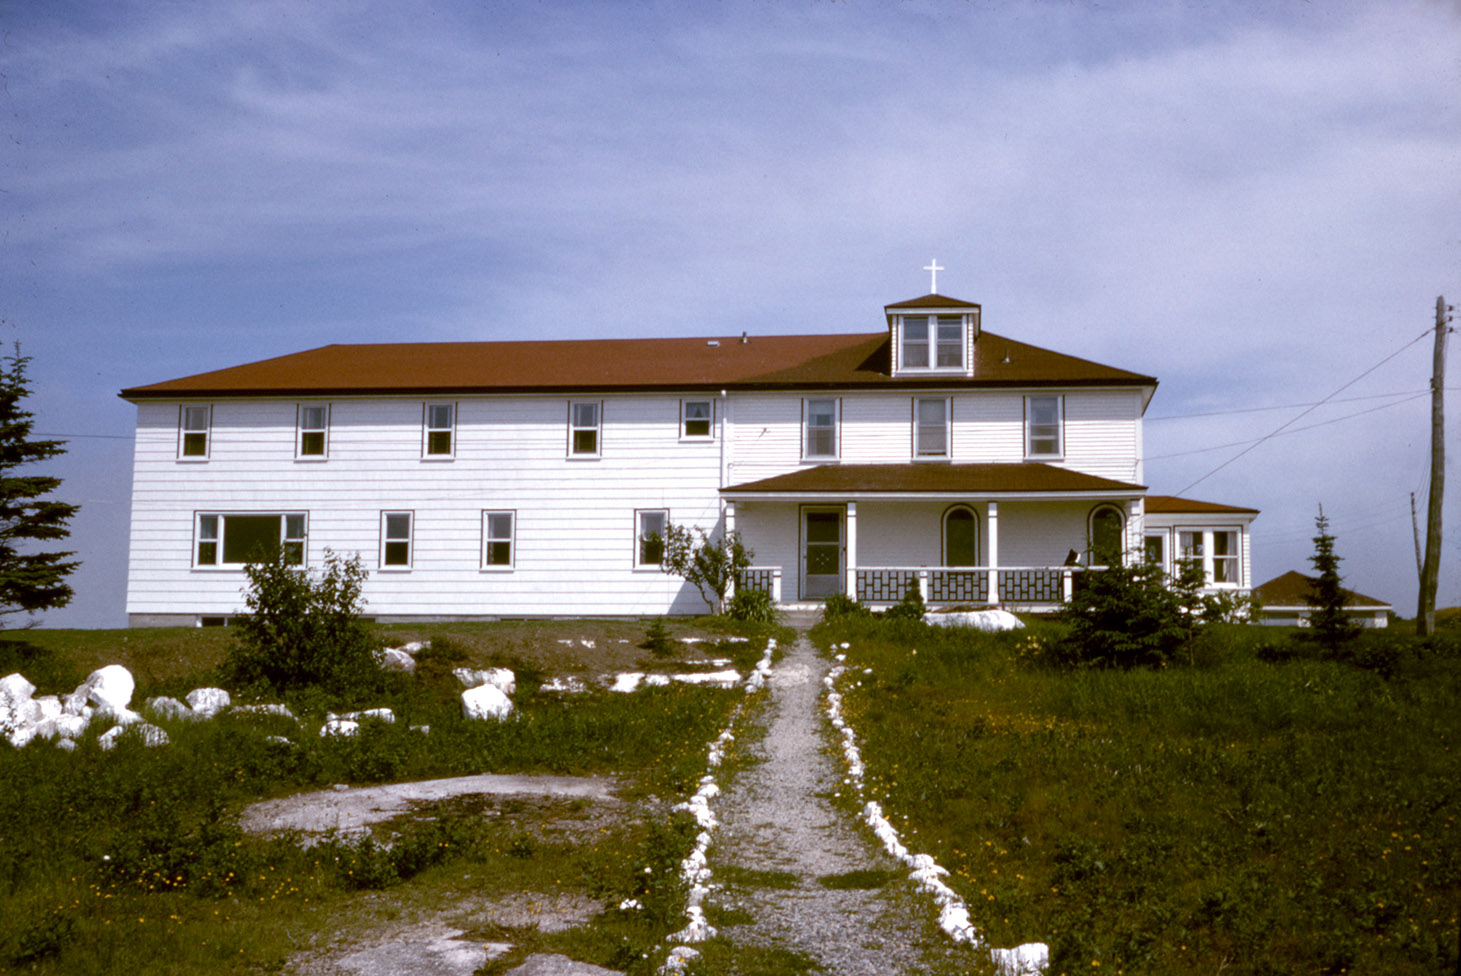 communityalbums - Star of the Sea Convent with new extensions, Terence Bay, Nova Scotia.